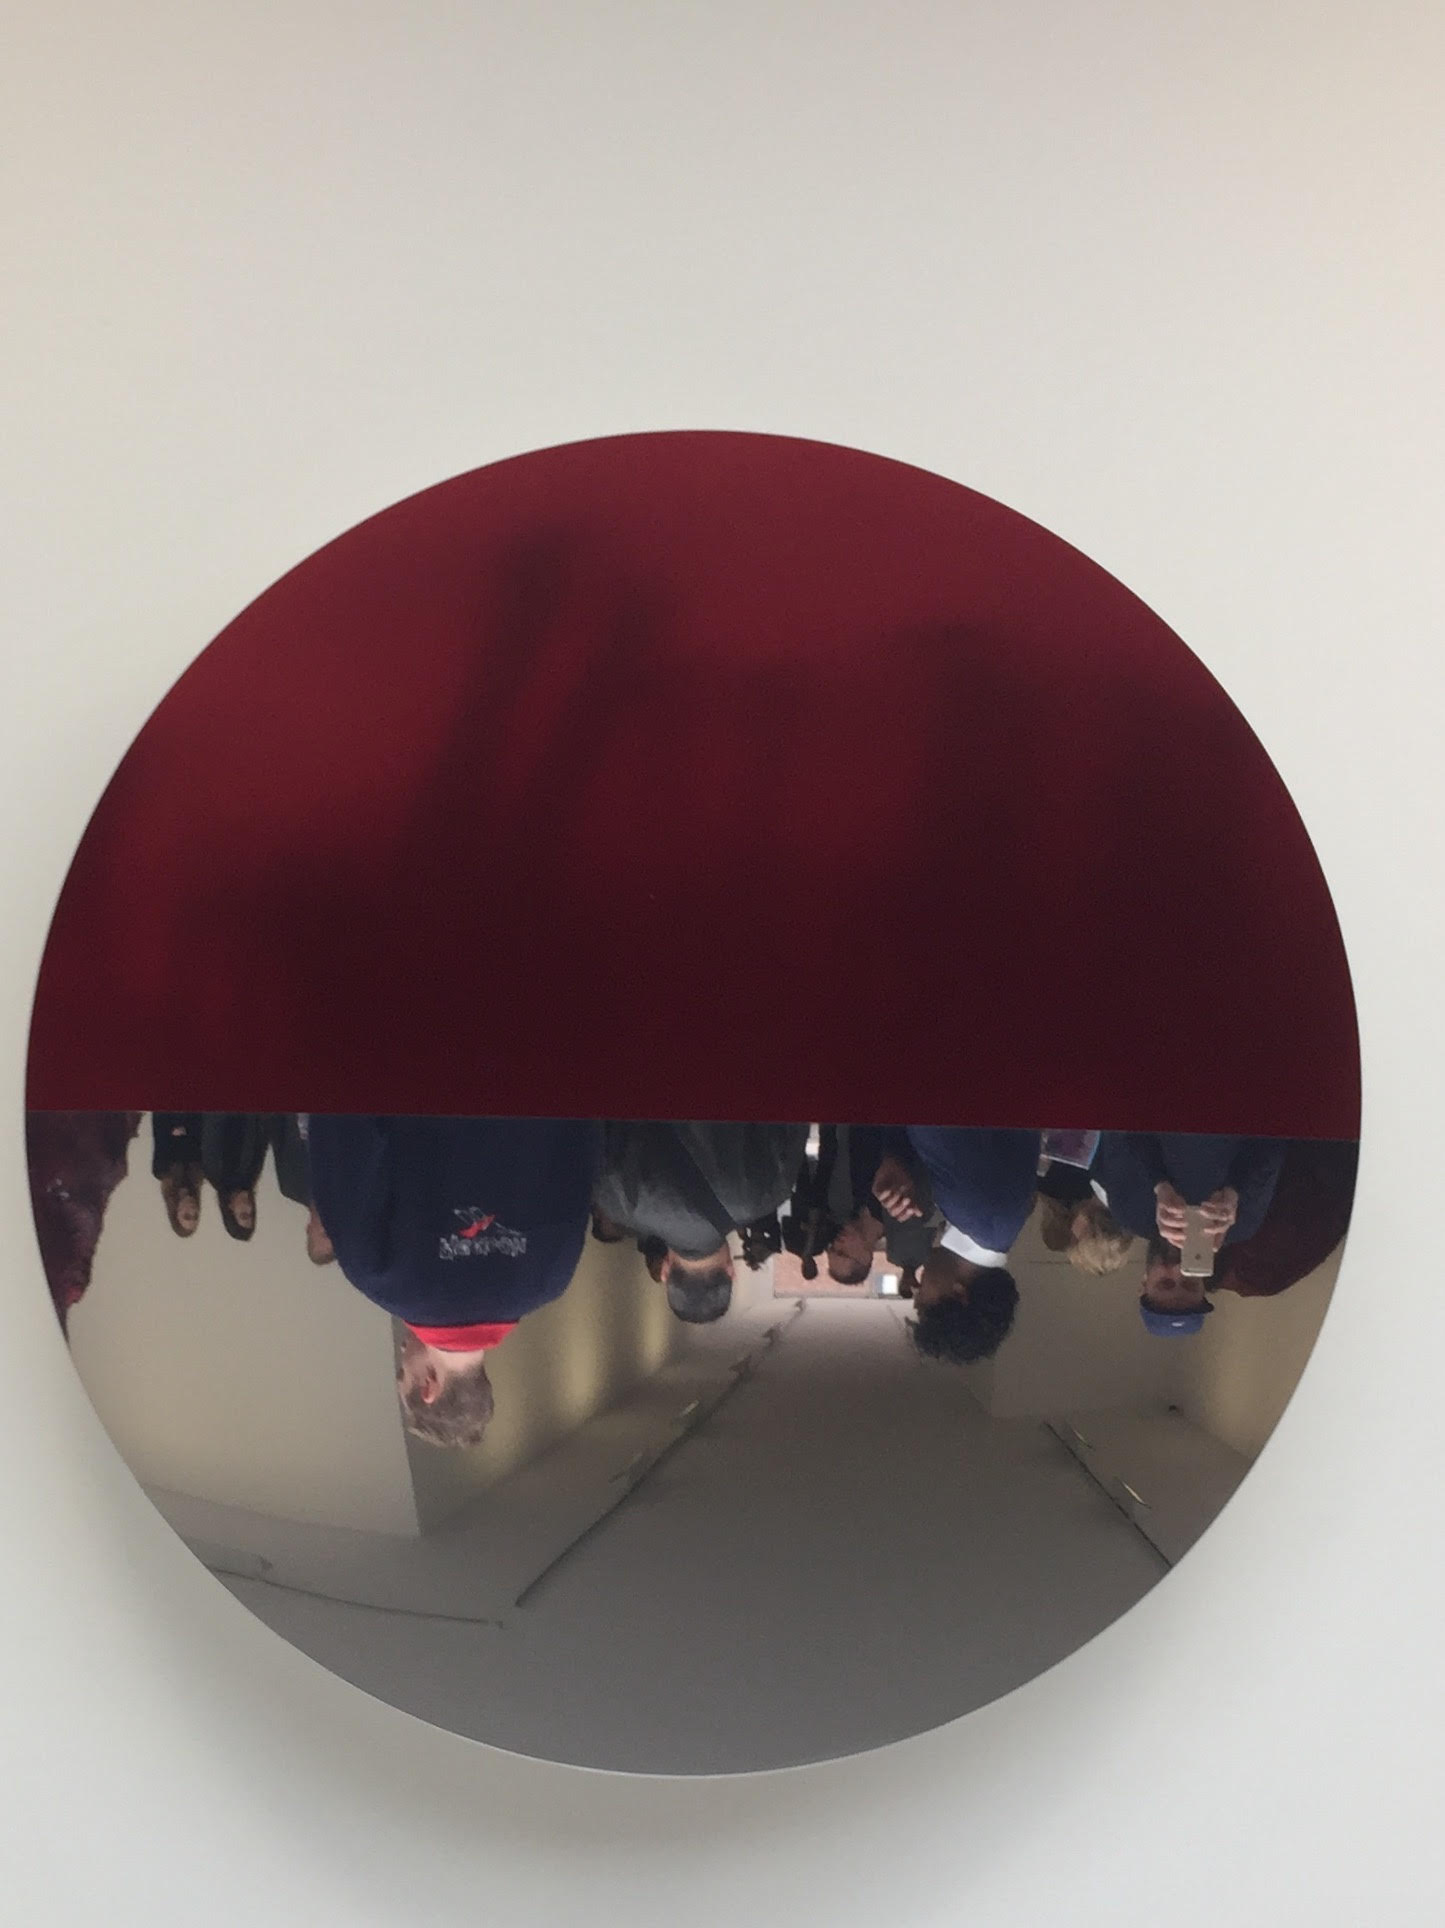 Anish Kapoor Lisson gallery image by Mark Hayes Westall 